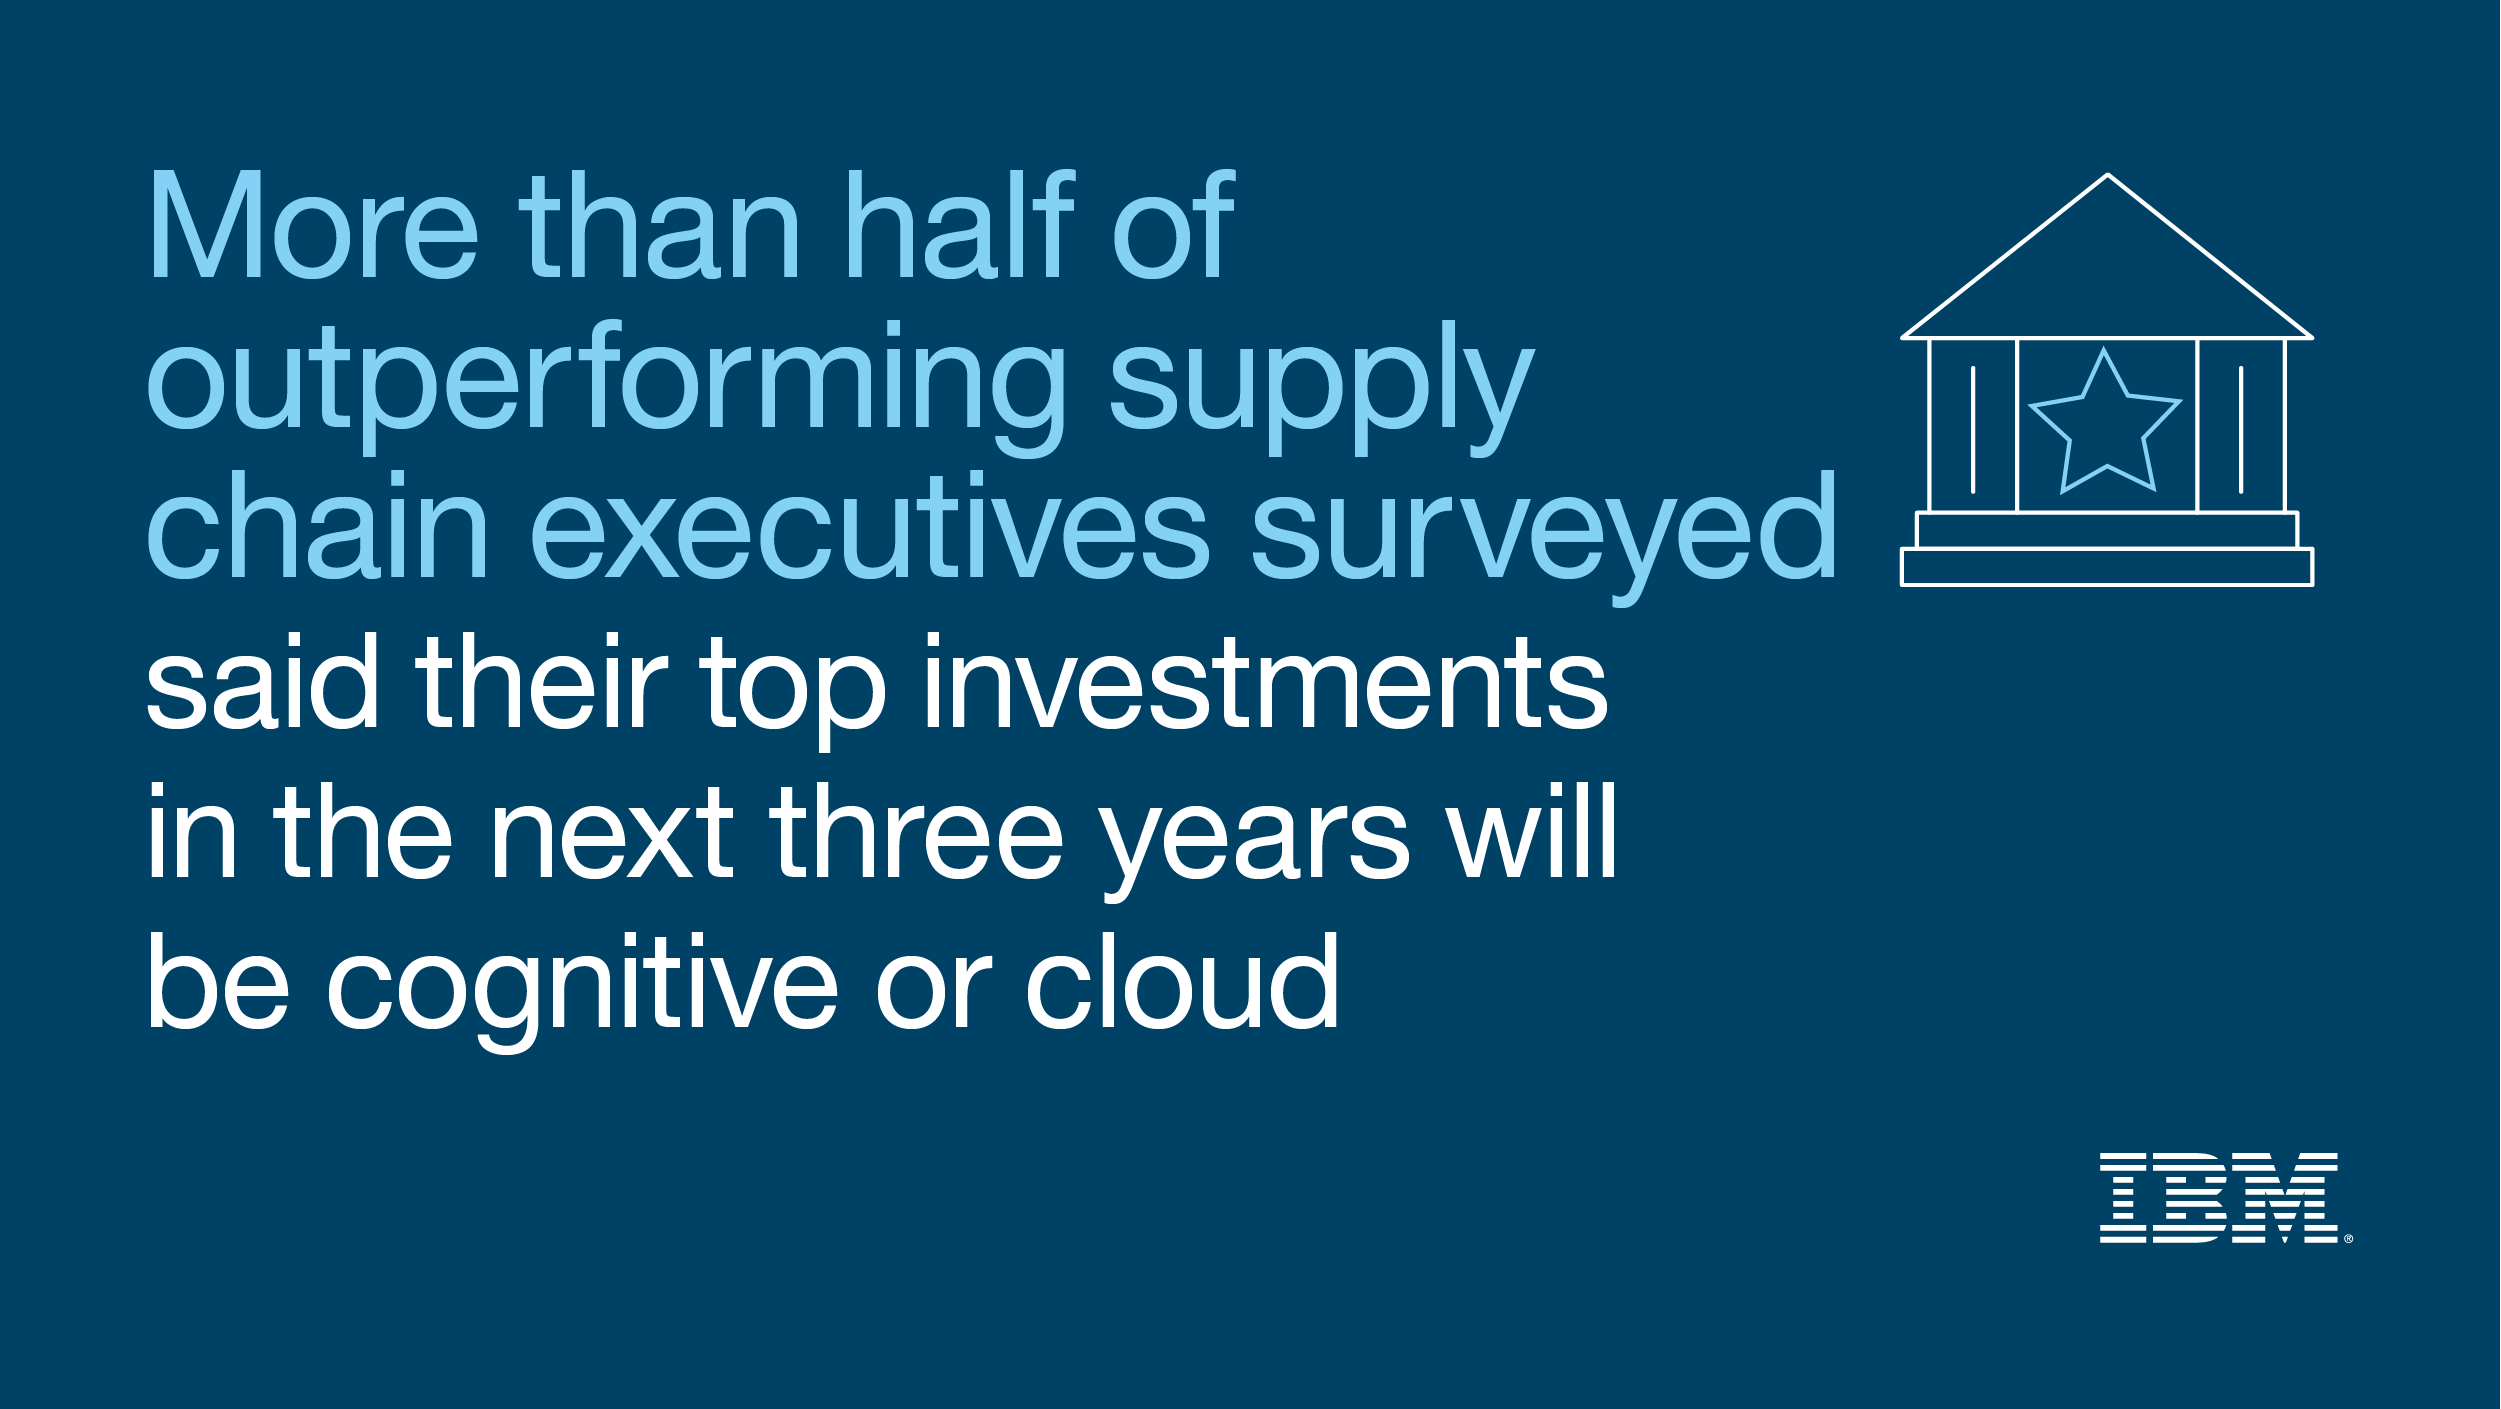 More than half of outperforming supply chain executives surveyed said their top investments in the next three years will be AI or cloud.